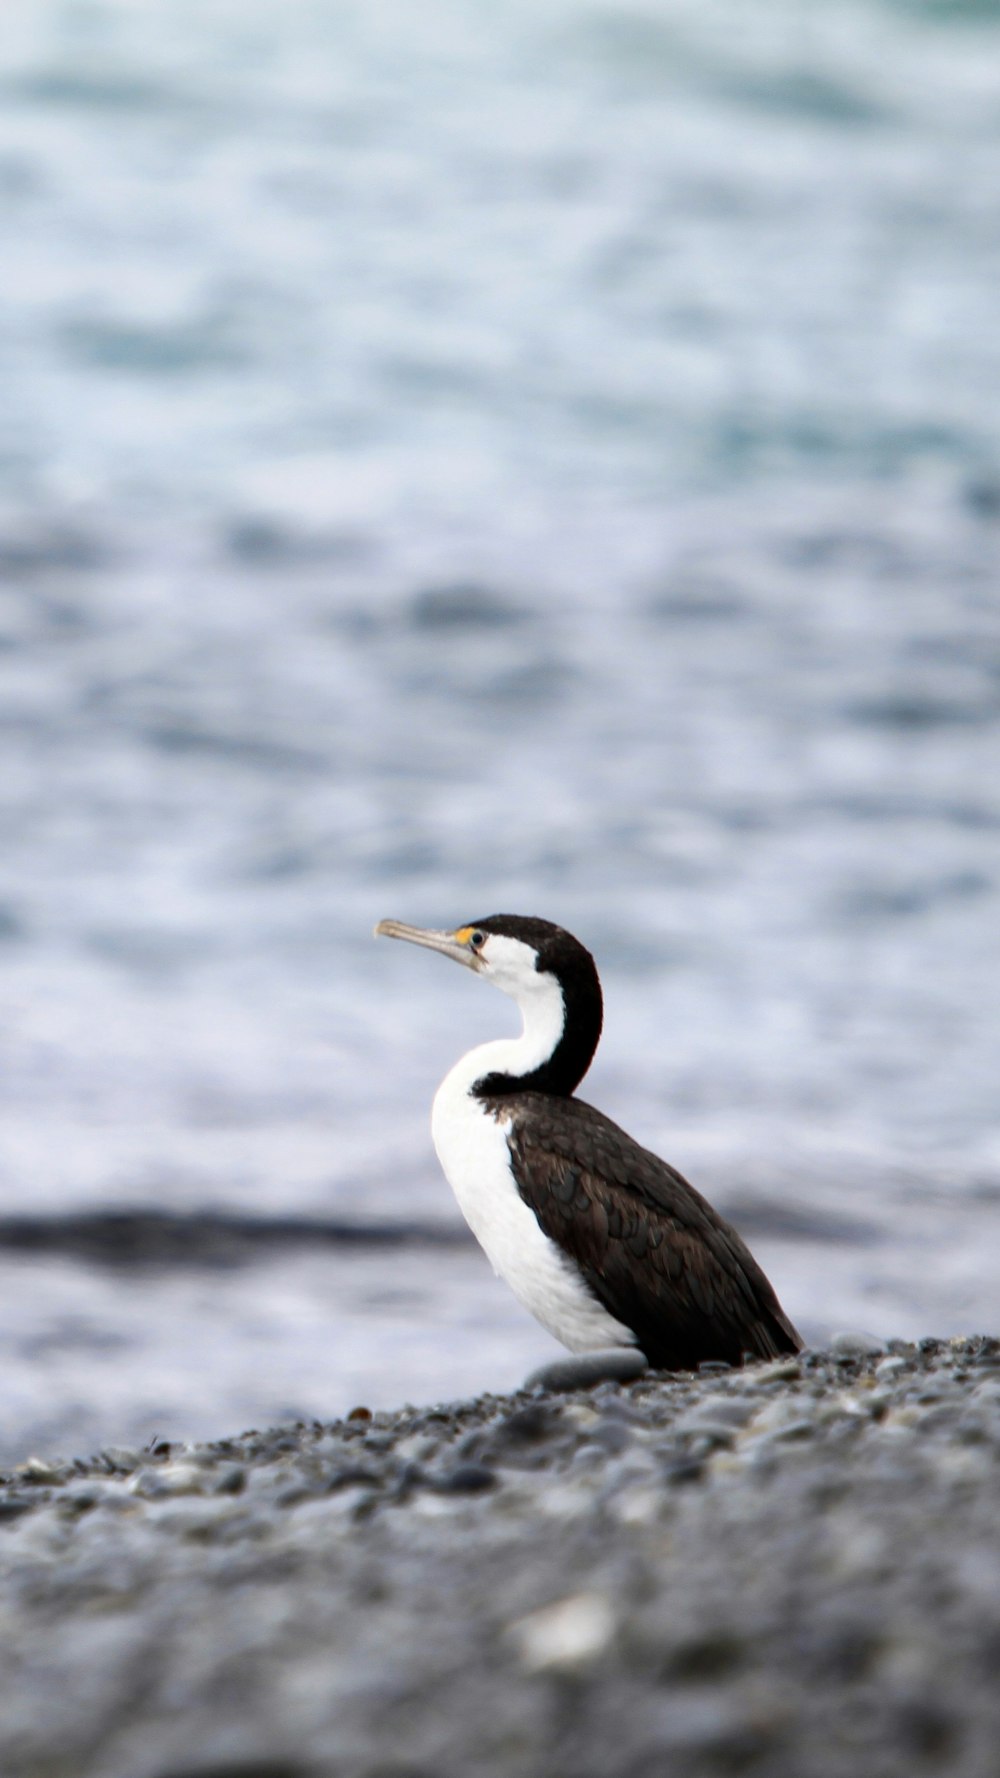 black and white bird on rock near body of water during daytime